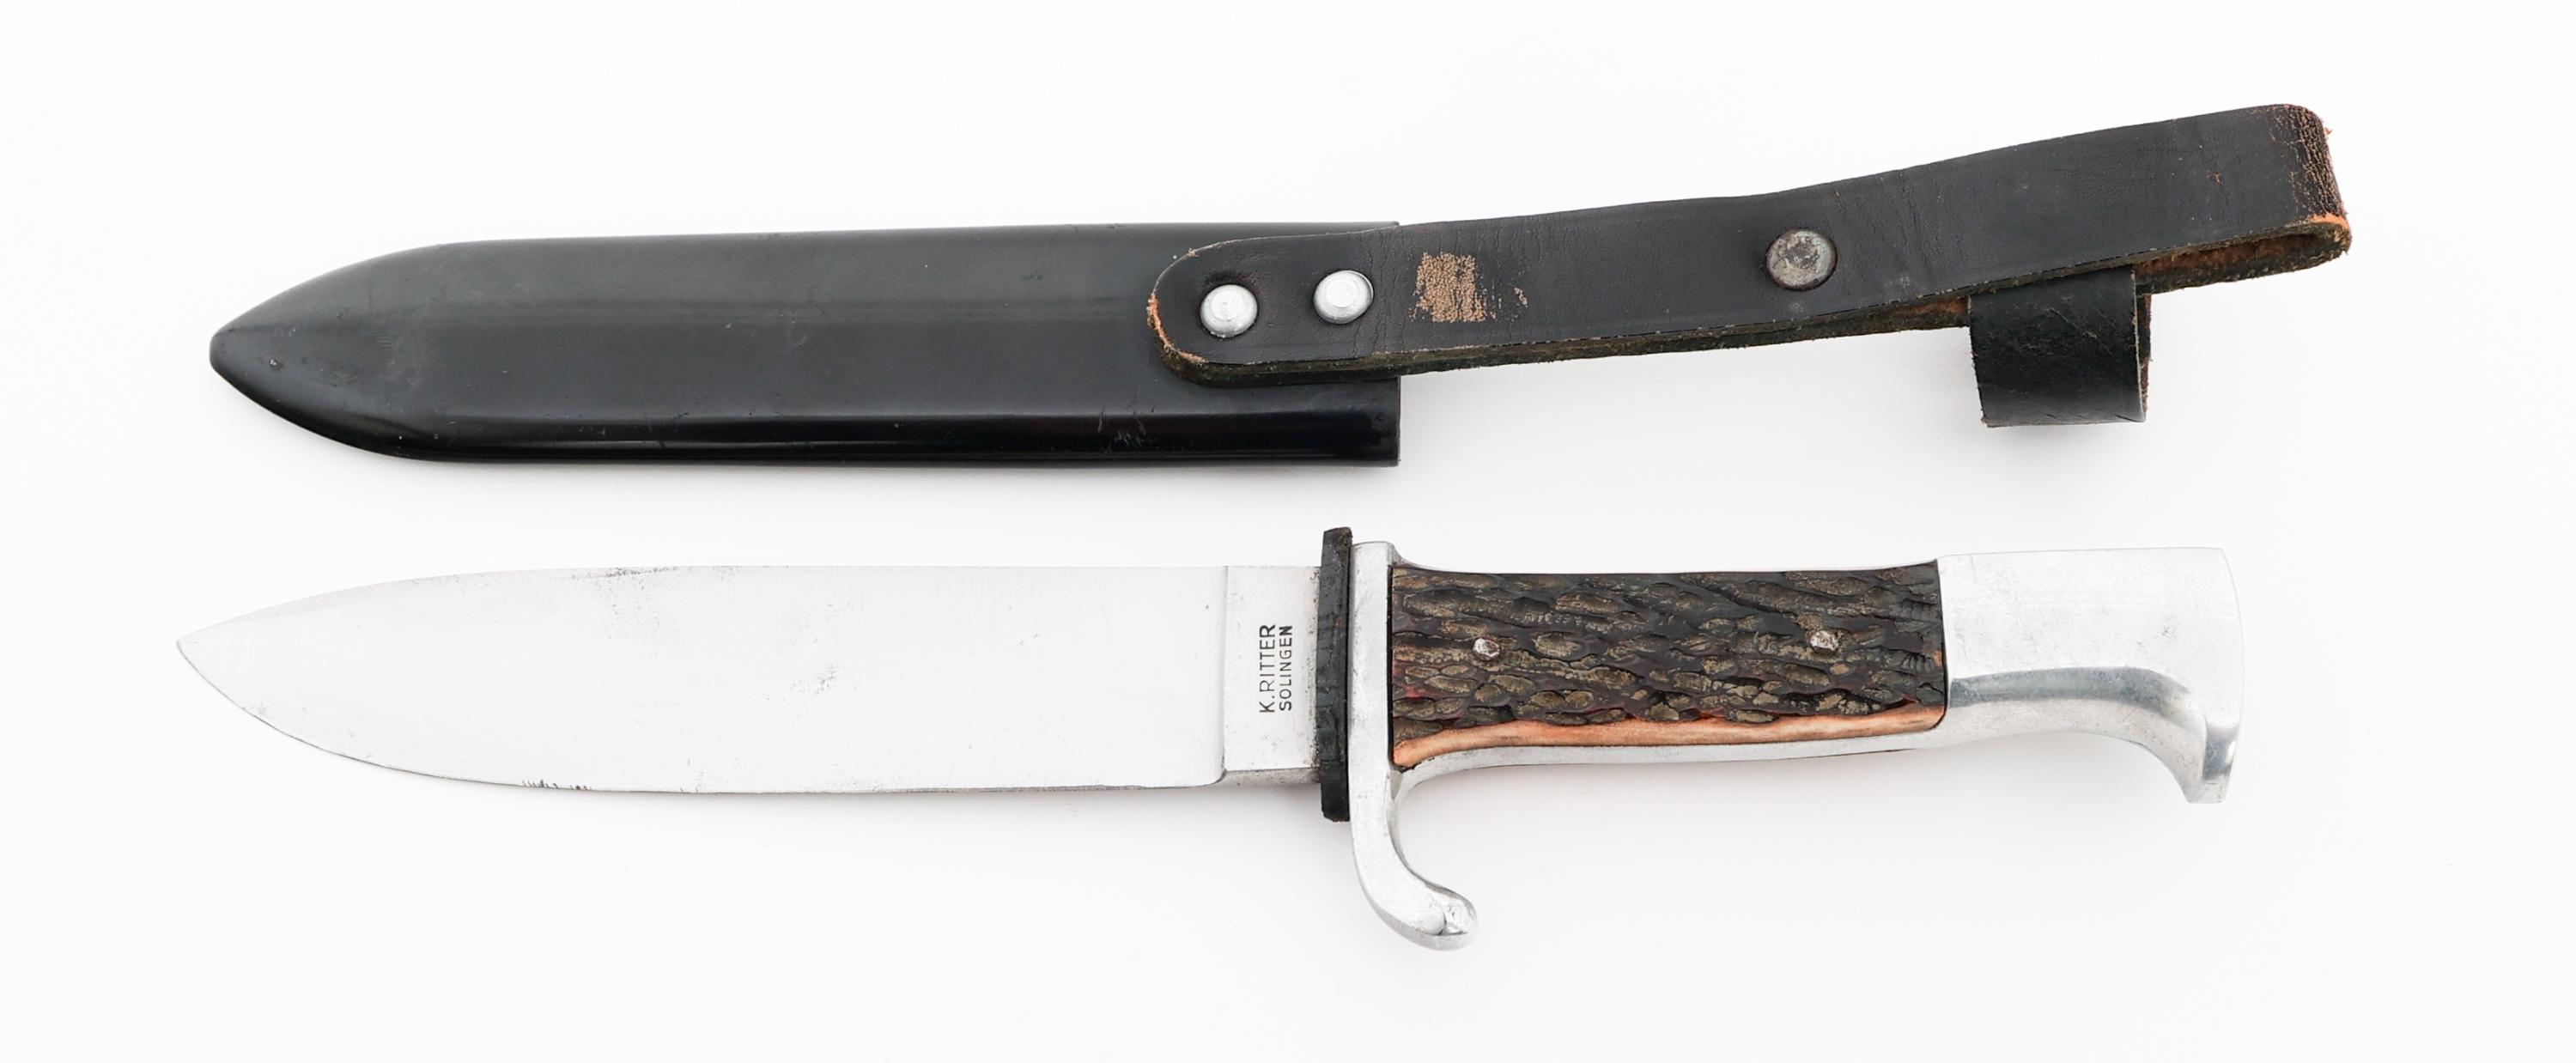 POST WWII GERMAN HUNTING KNIFE by BROOKS KNIFE CO